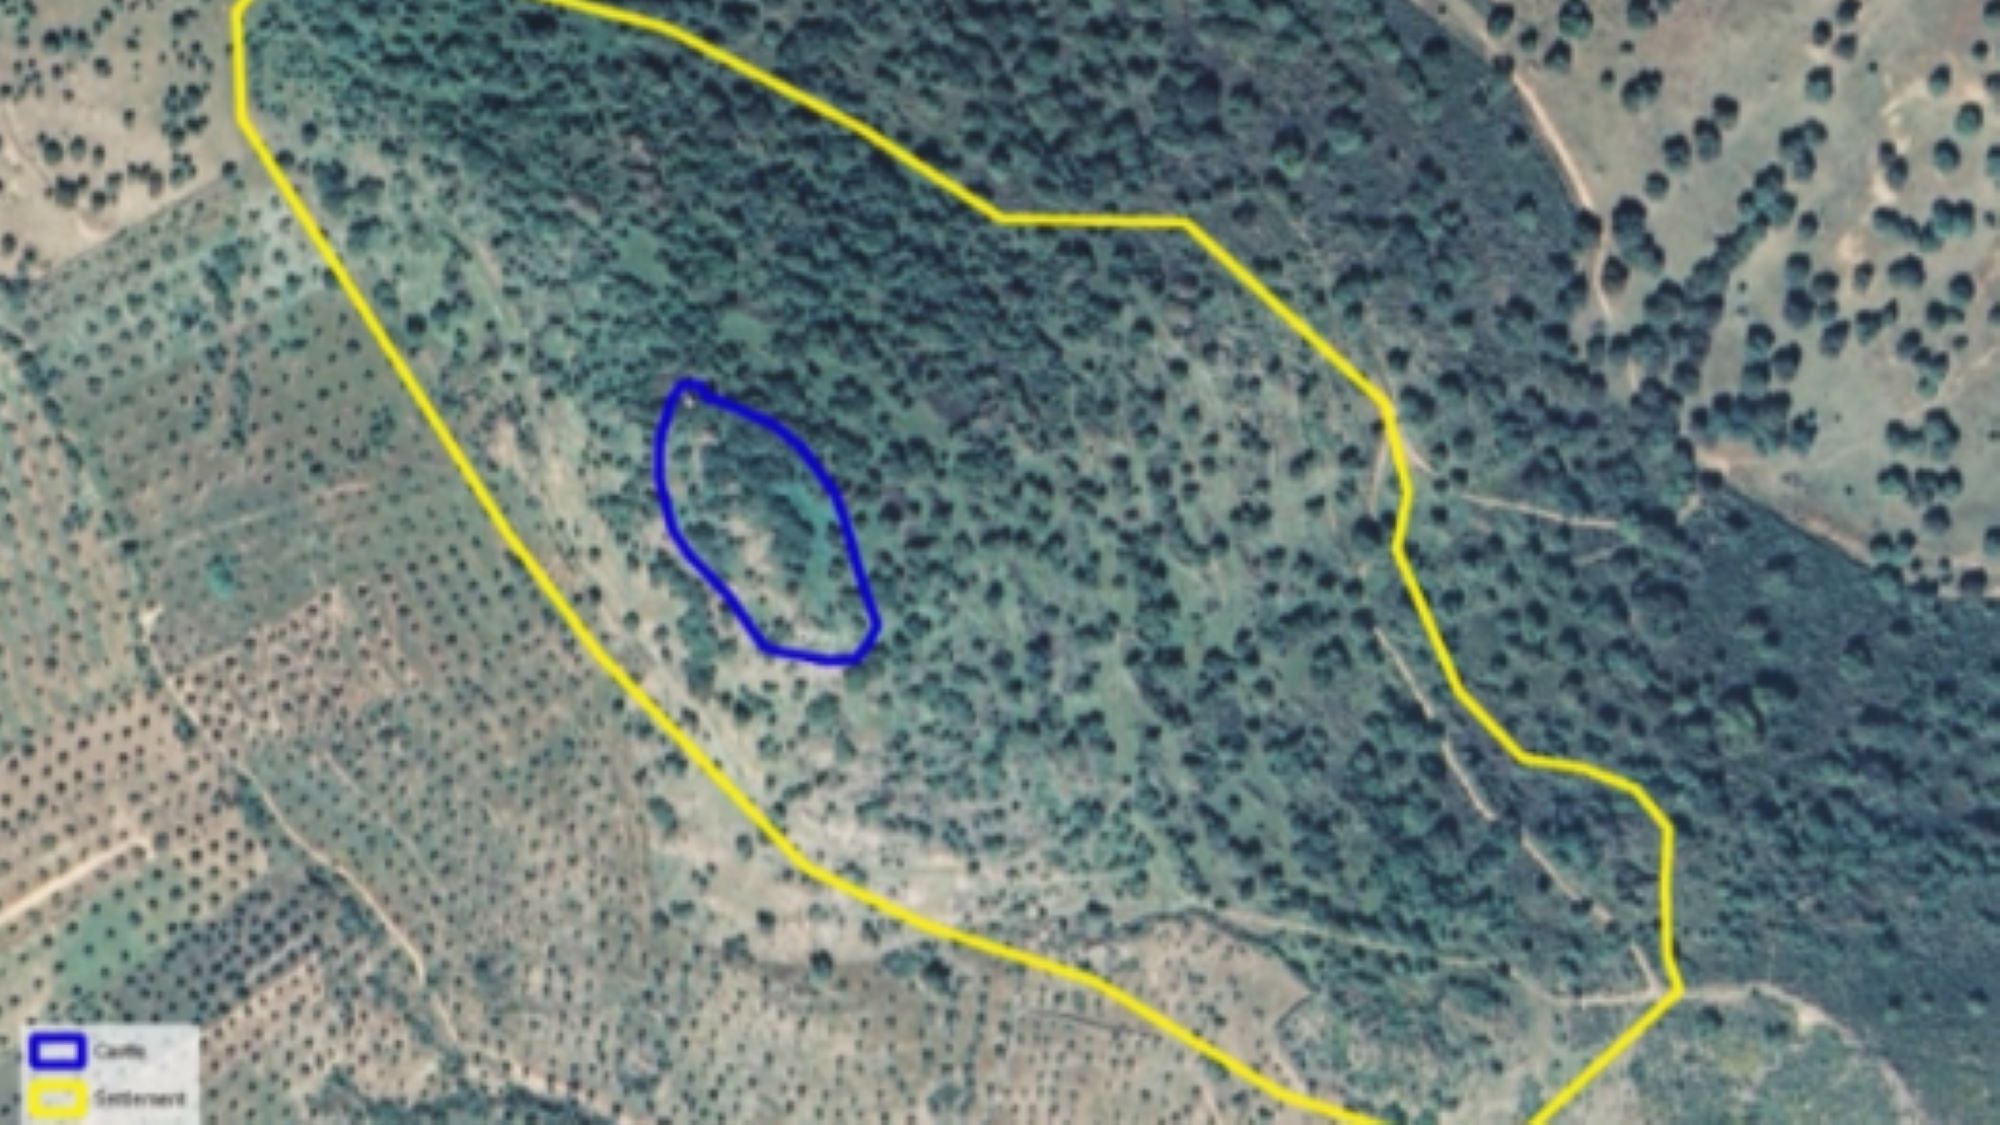 An image showing the area where the castle is located.